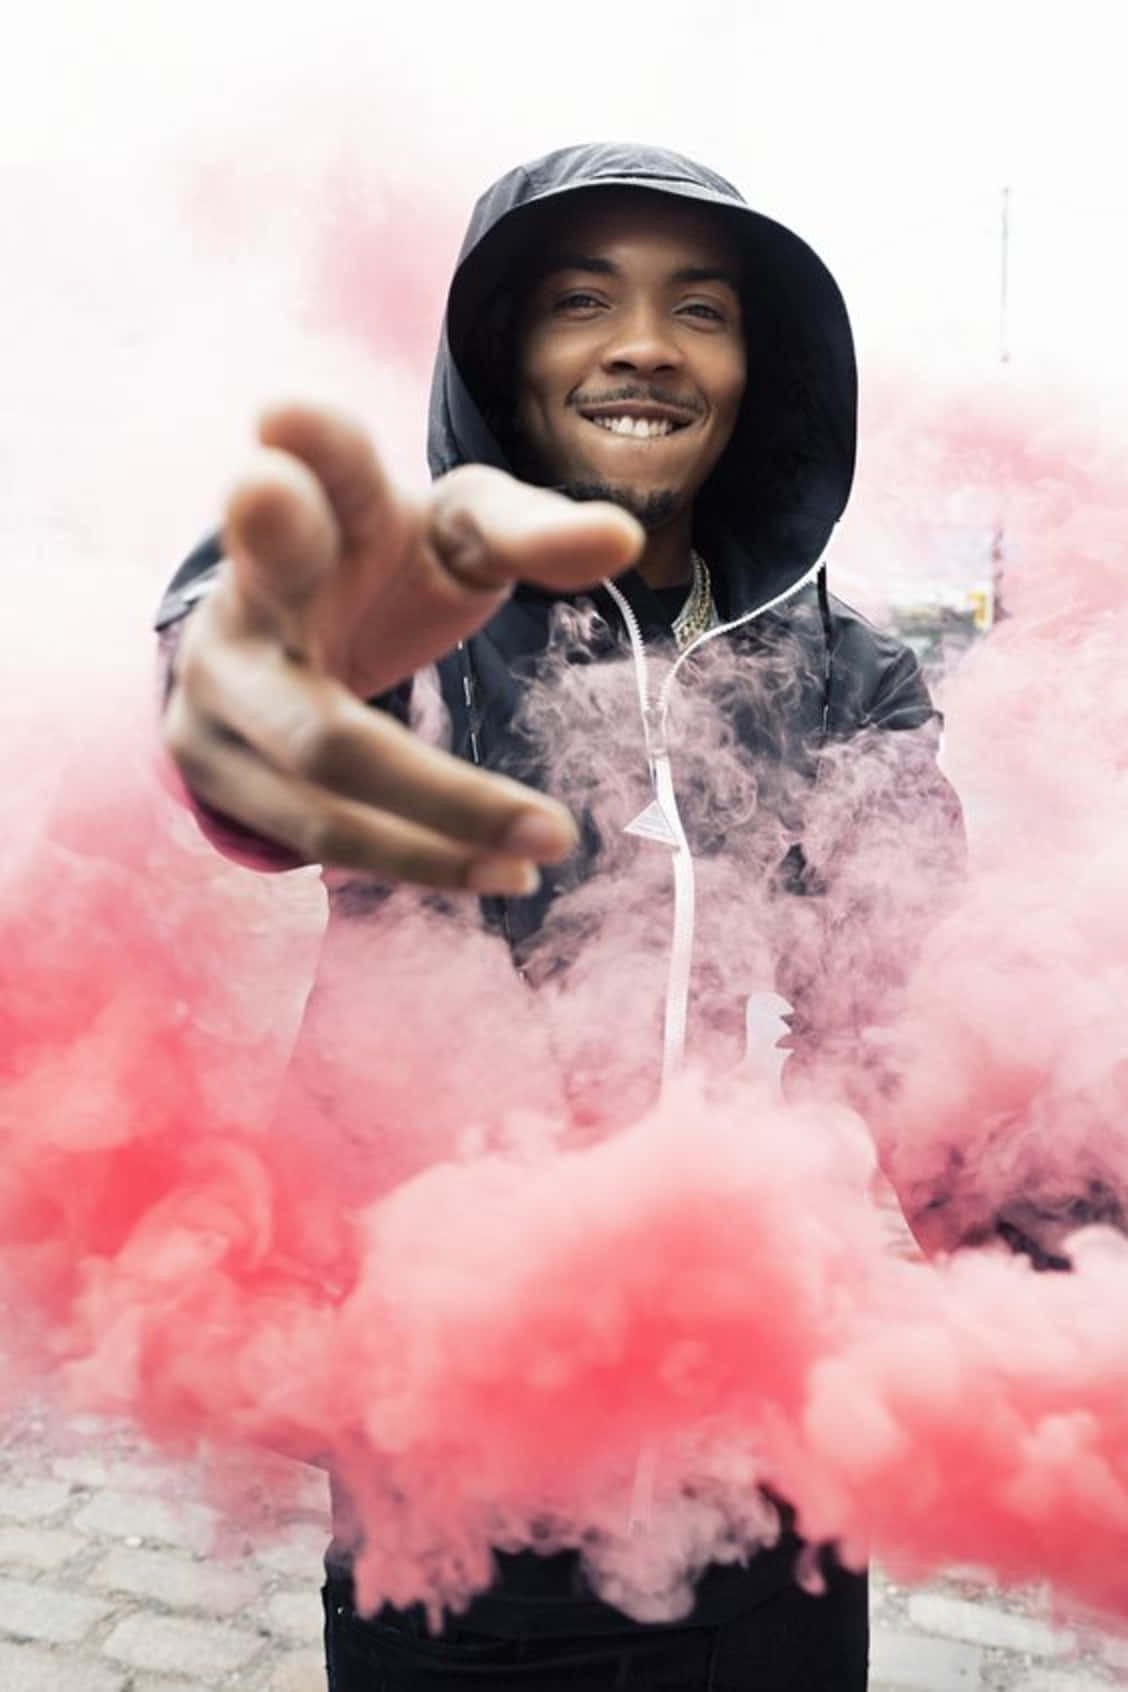 Get the freedom to express your creativity with the Herbo Iphone Wallpaper